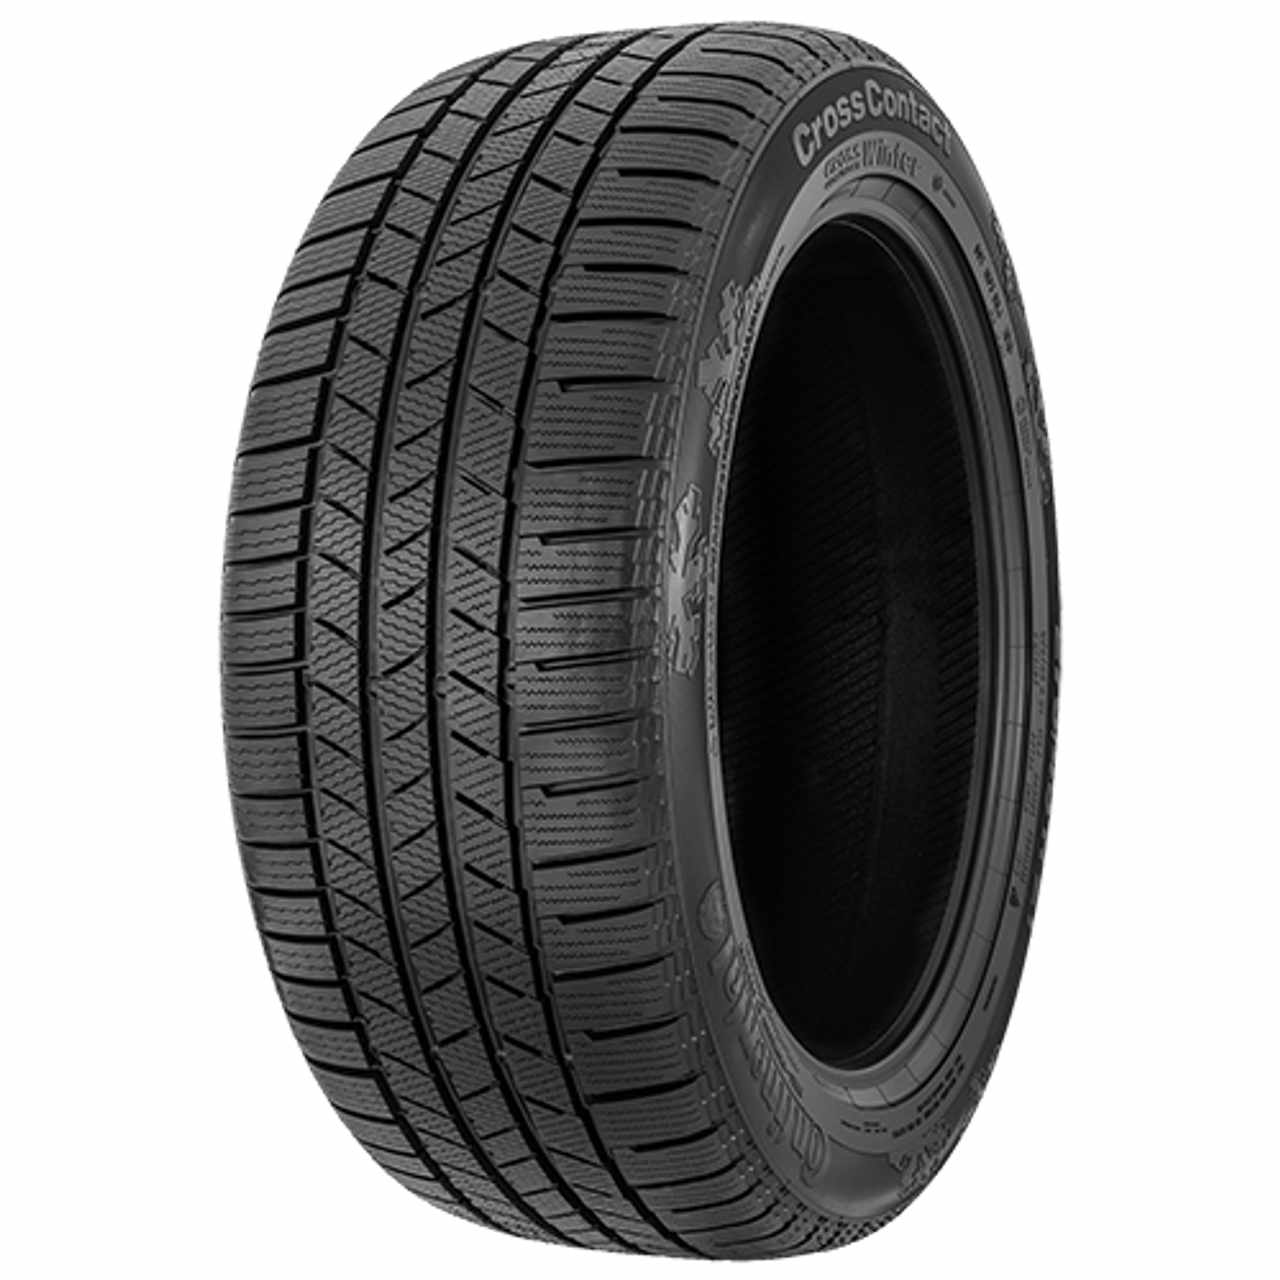 CONTINENTAL CONTICROSSCONTACT WINTER 225/65R17 102T 